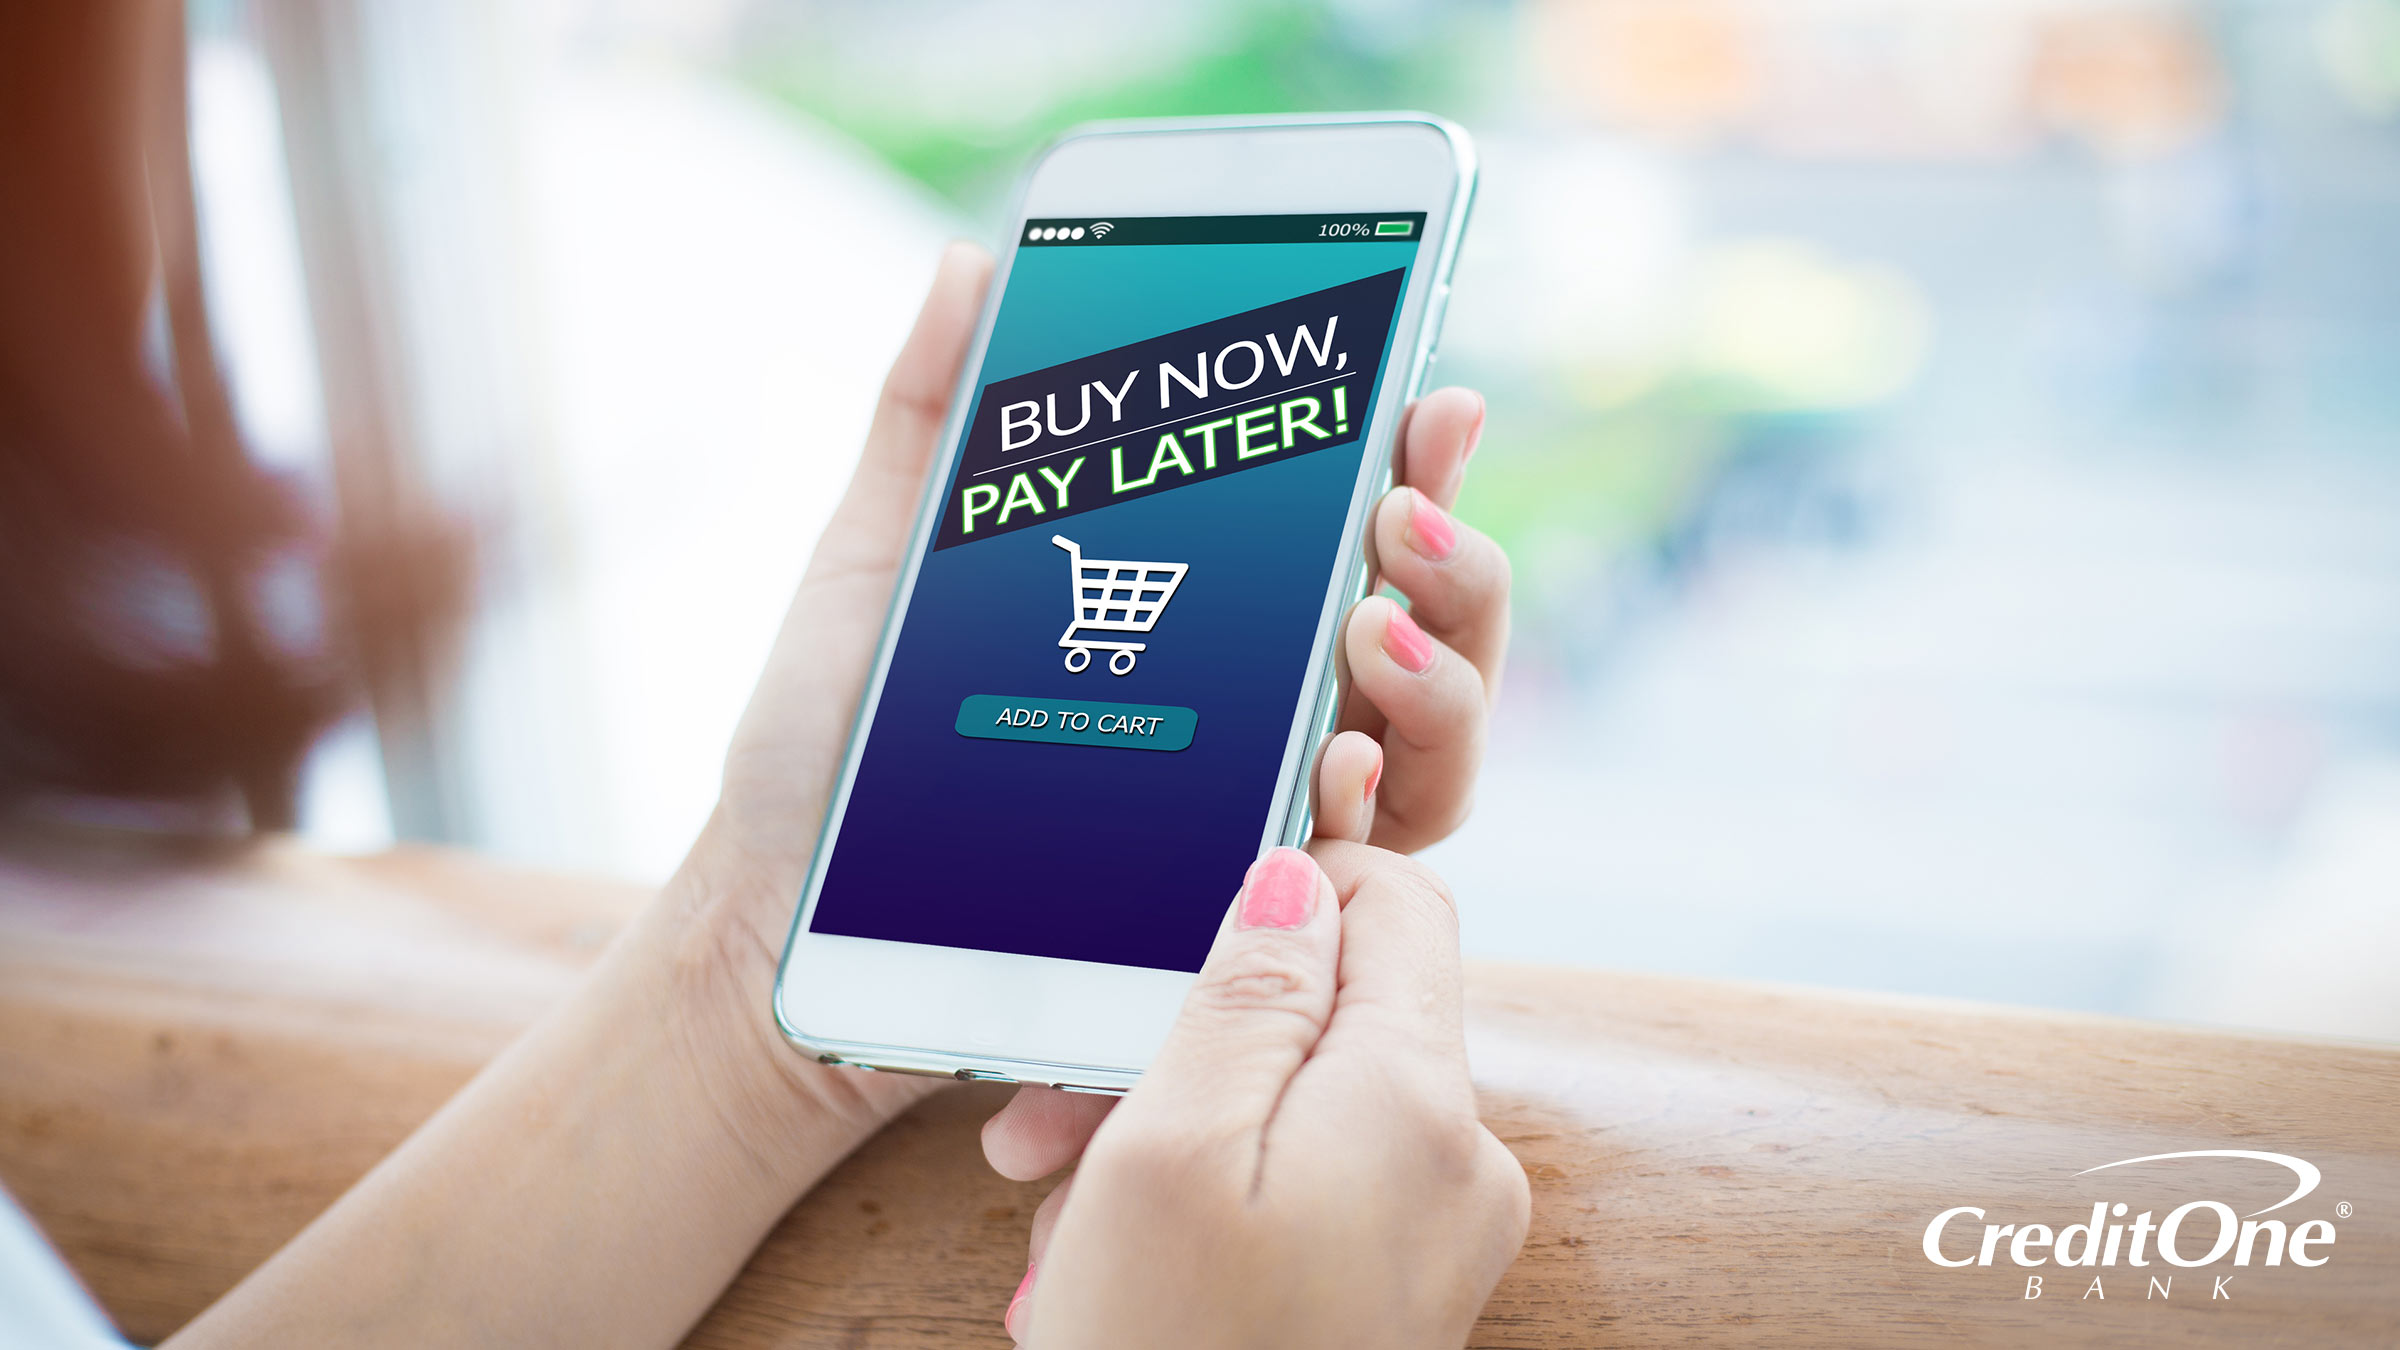 A woman shops on her phone, with the buy now, pay later option showing at the online checkout